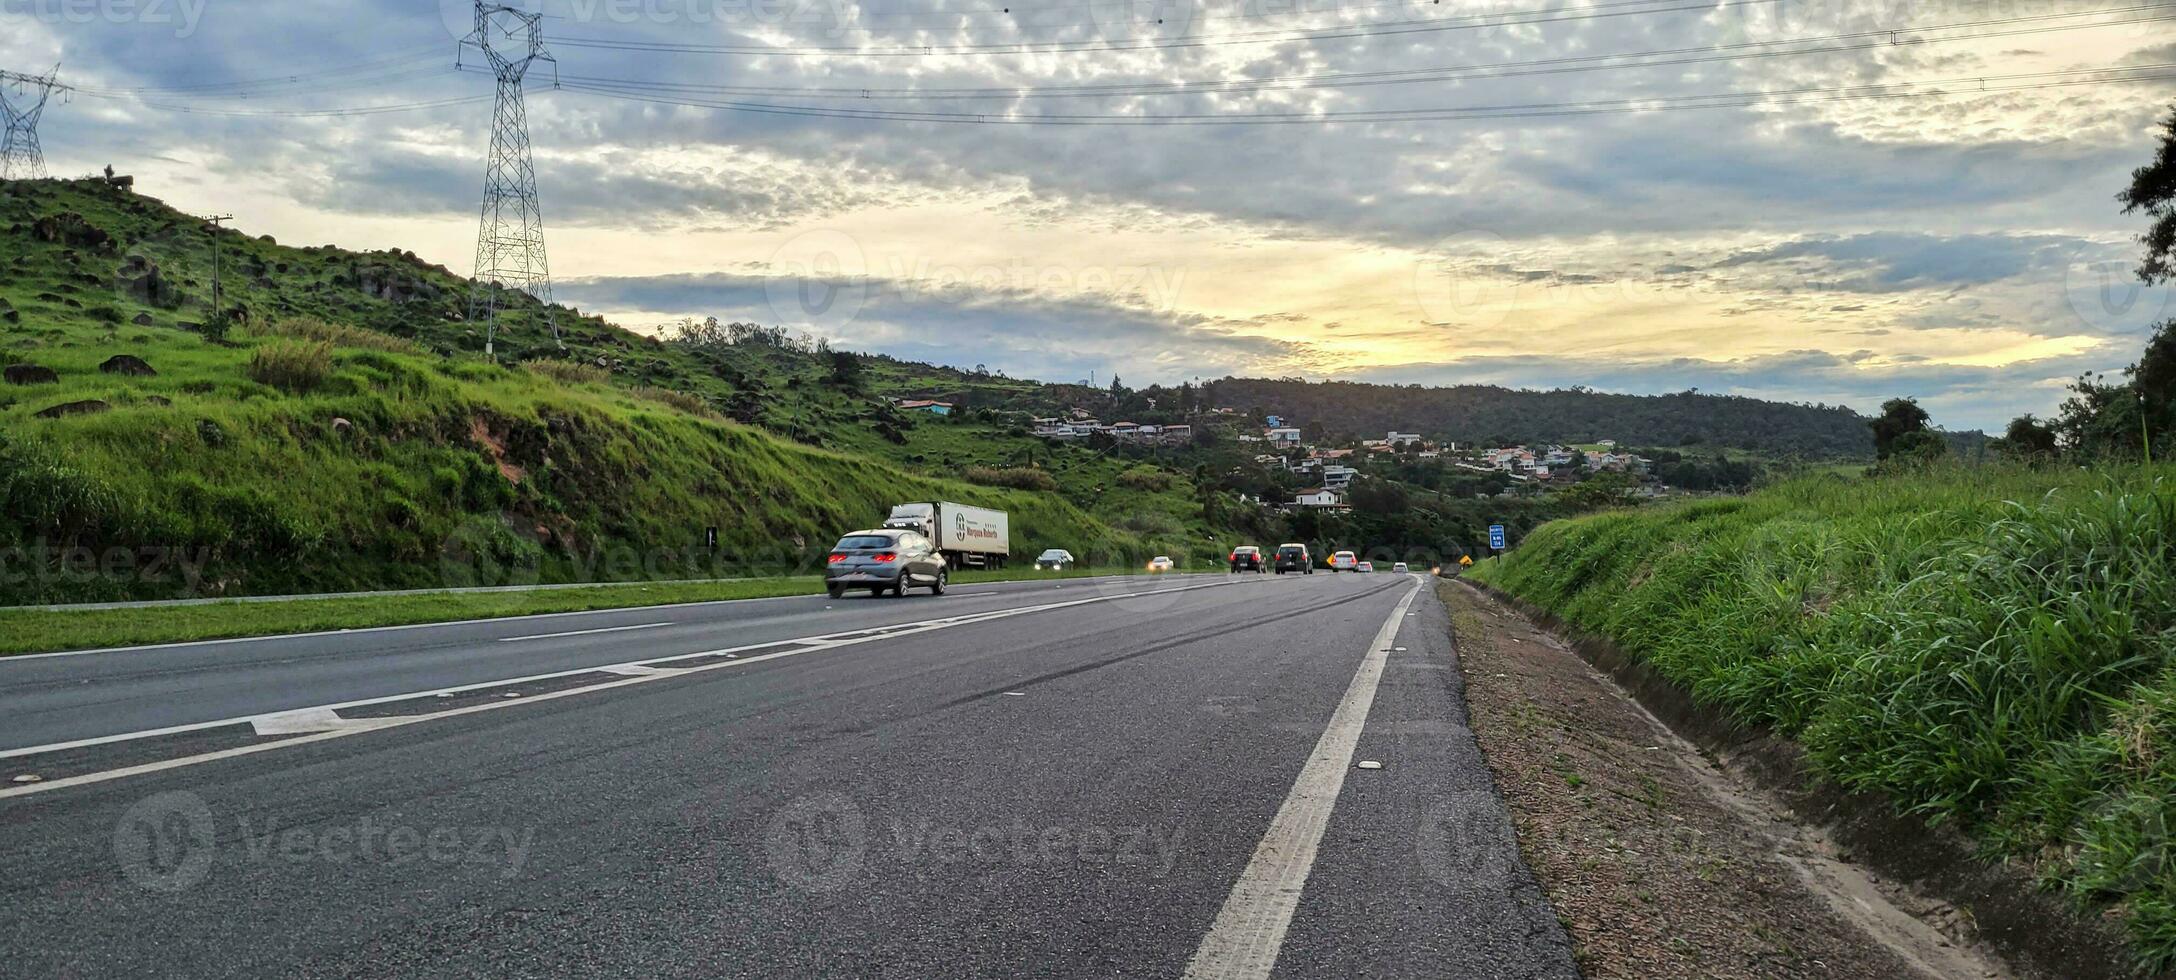 busy highway dom pedro first in the interior of brazil photo